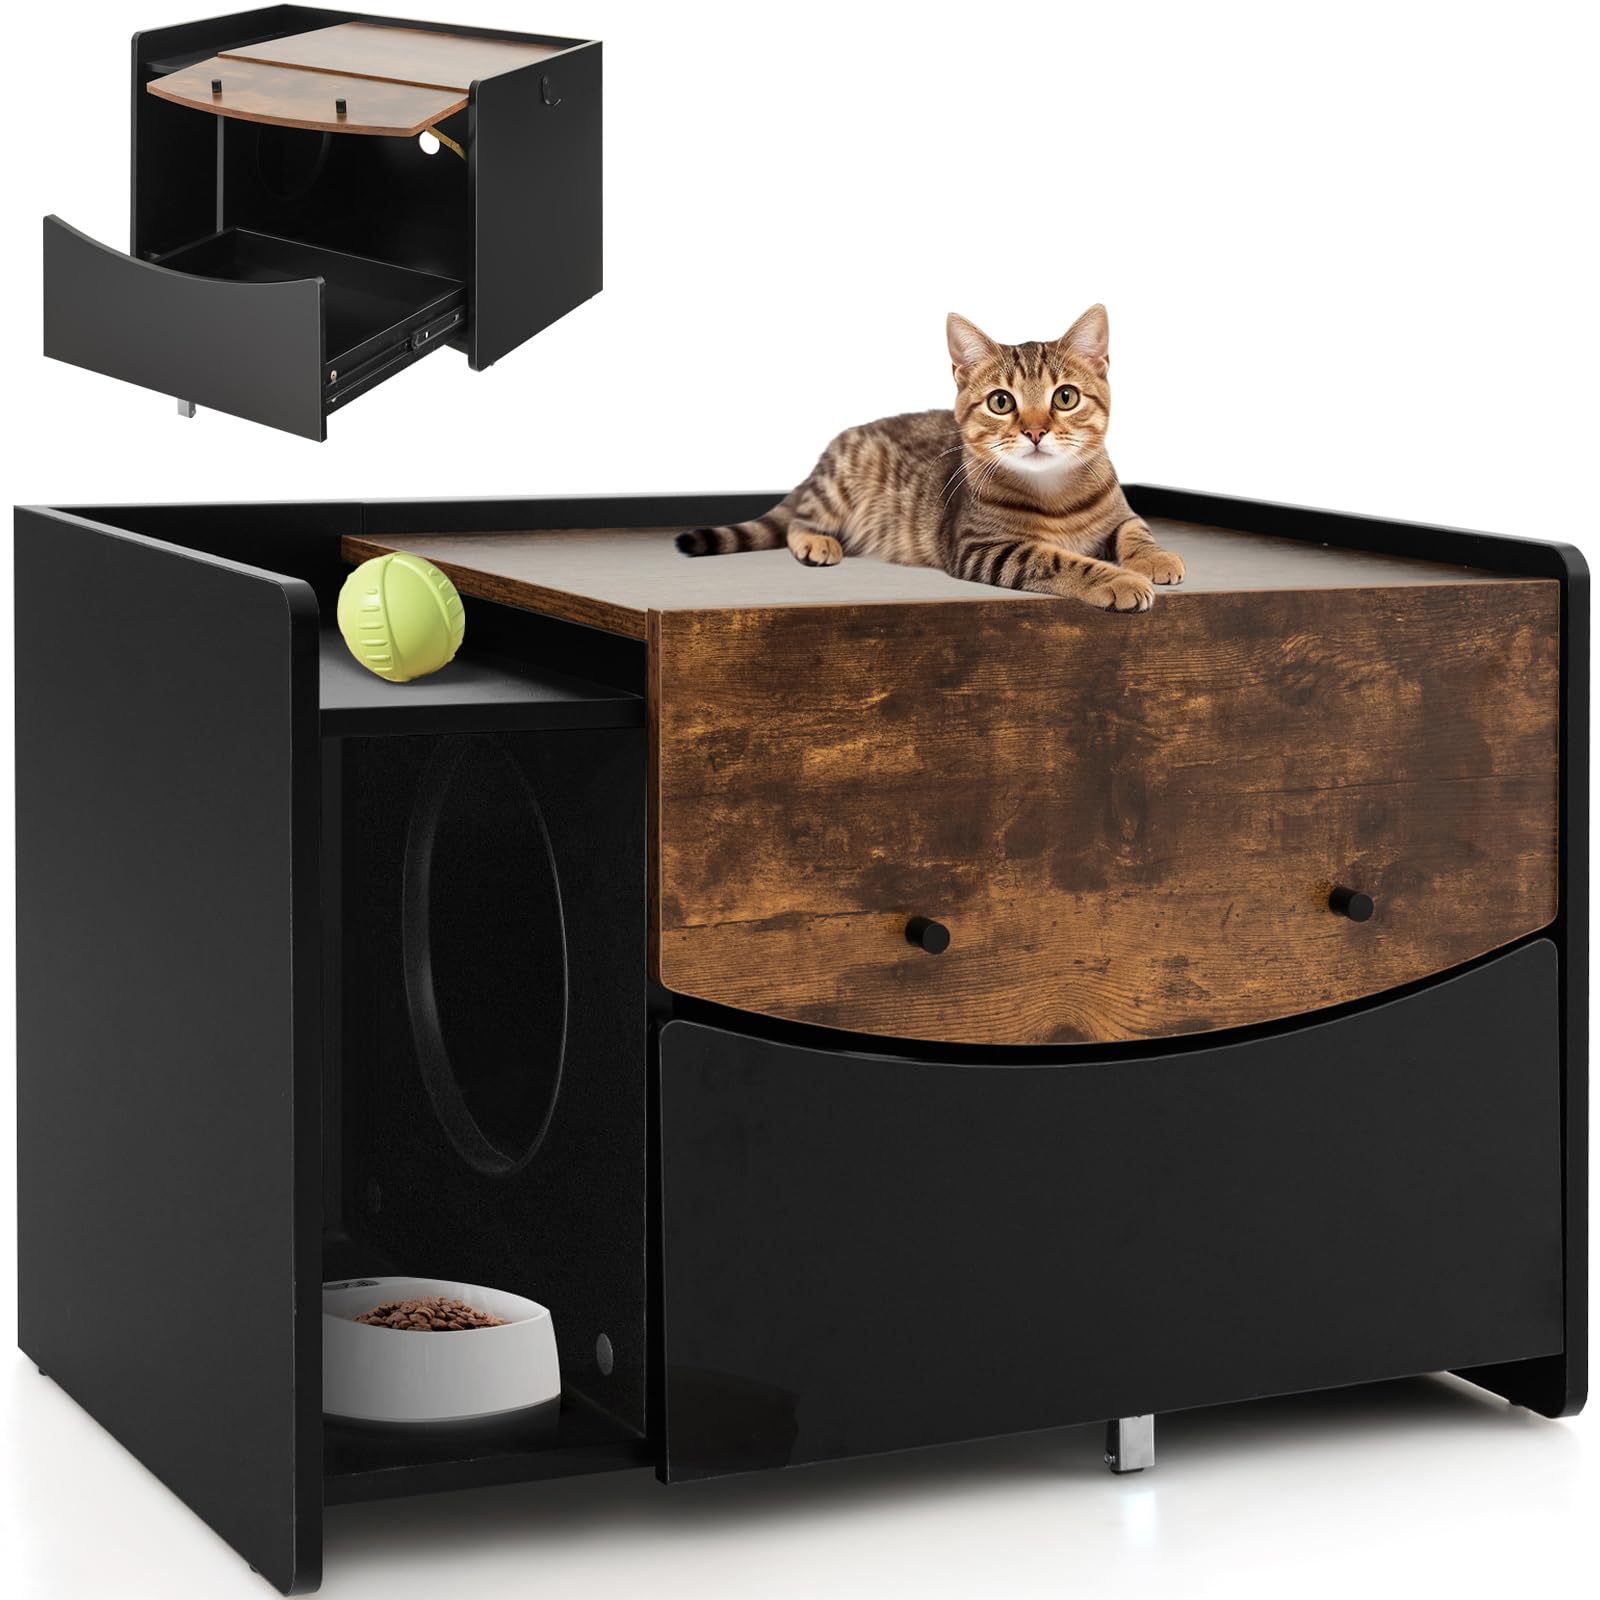 Giantex Cat Litter Box Enclosure - Hidden Cat Washroom Furniture with Rolling Pull-Out Drawer